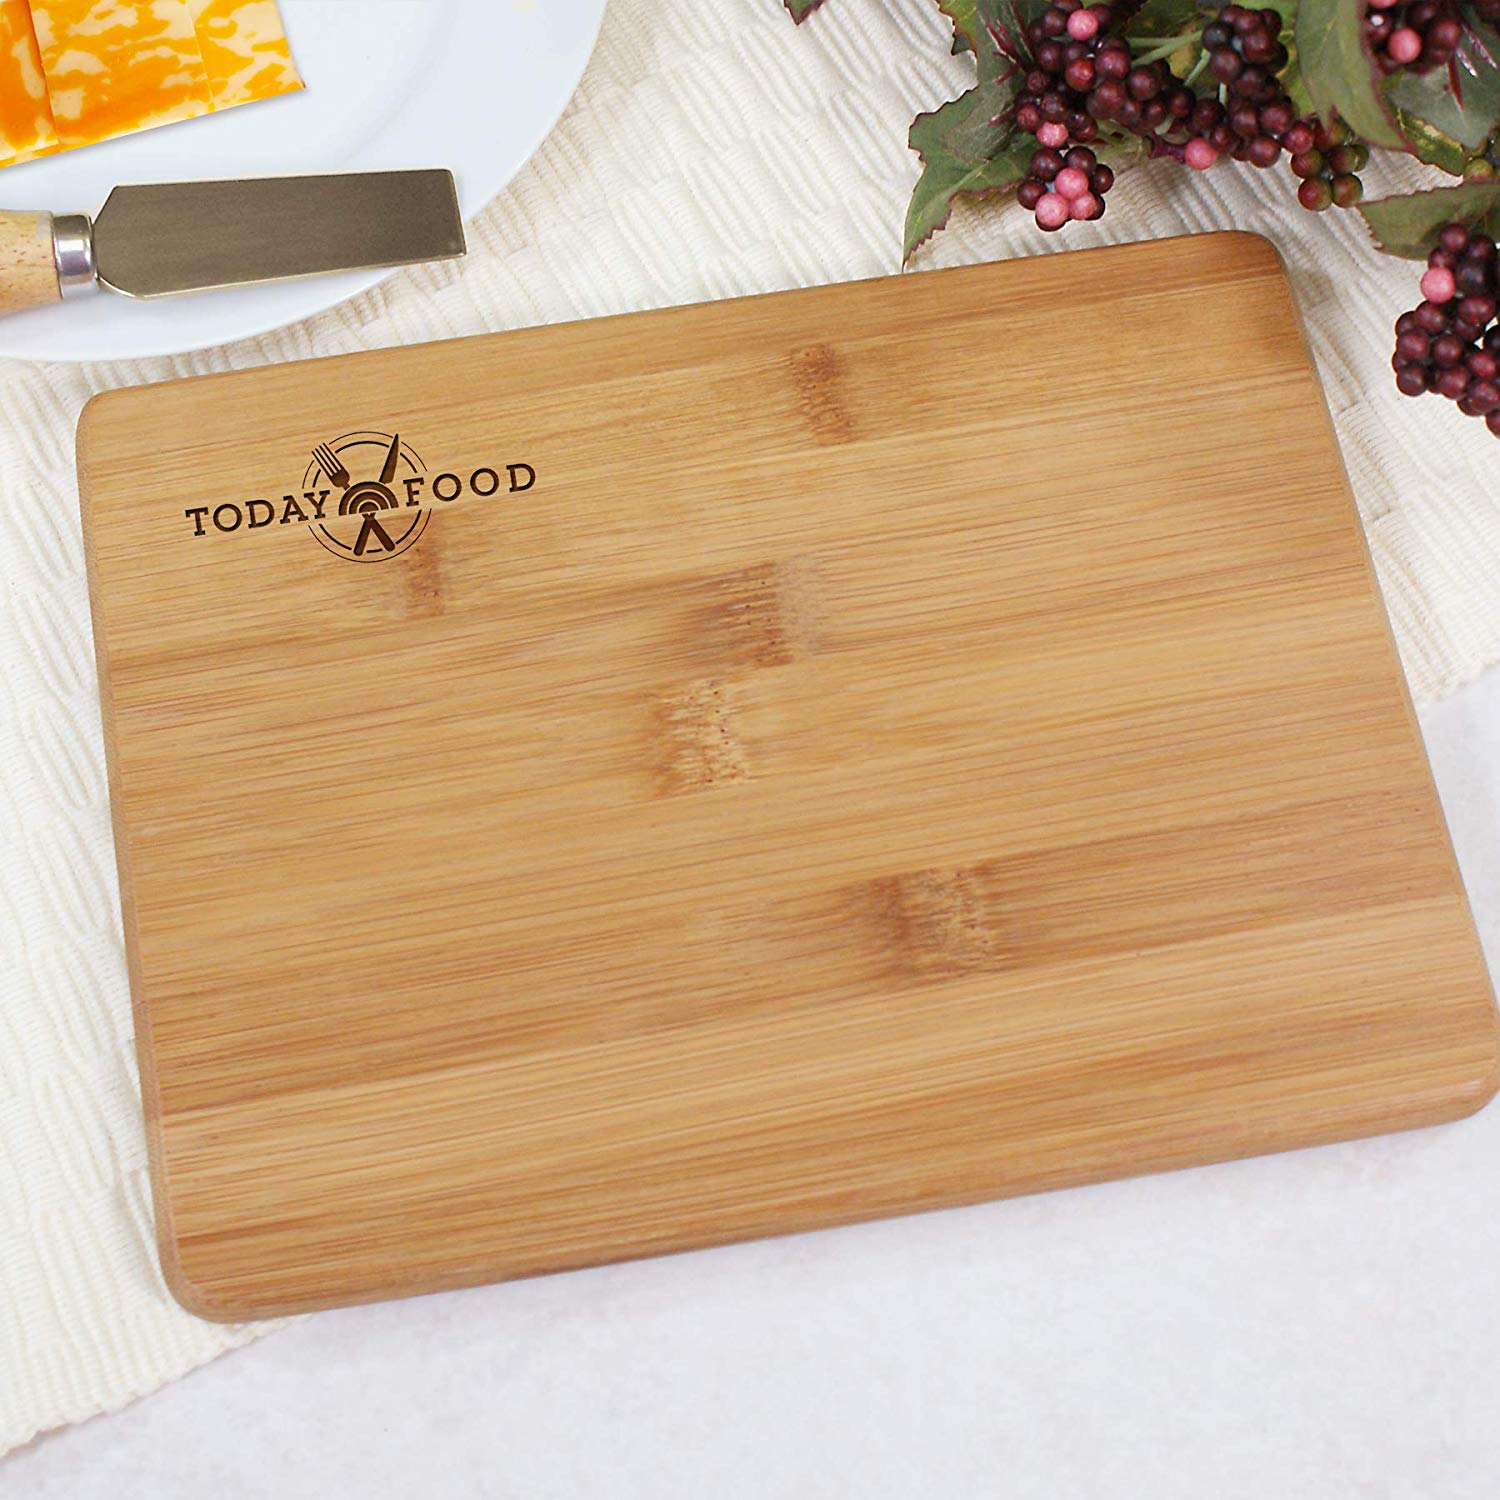 TODAY Food Small Cutting Board